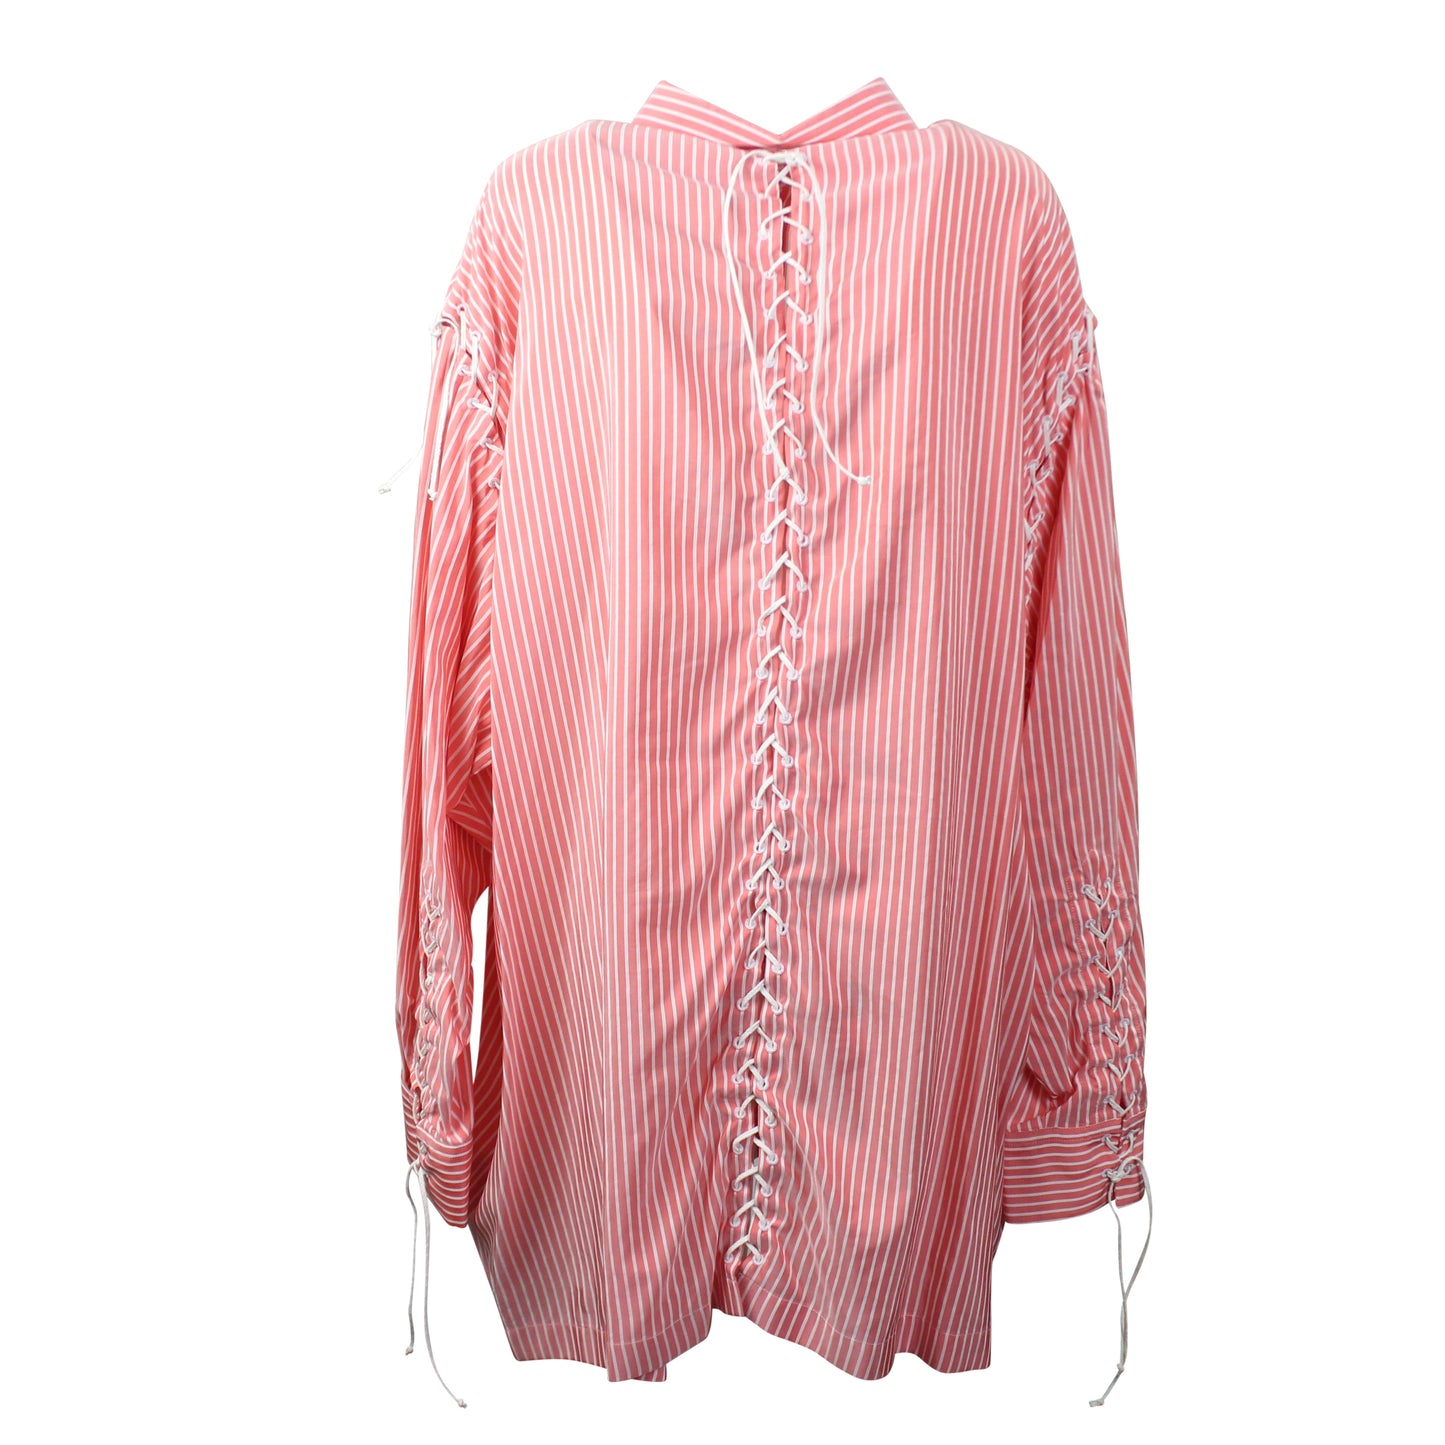 Unravel Project Lace Up Long Sleeve Shirt Dress - Pink